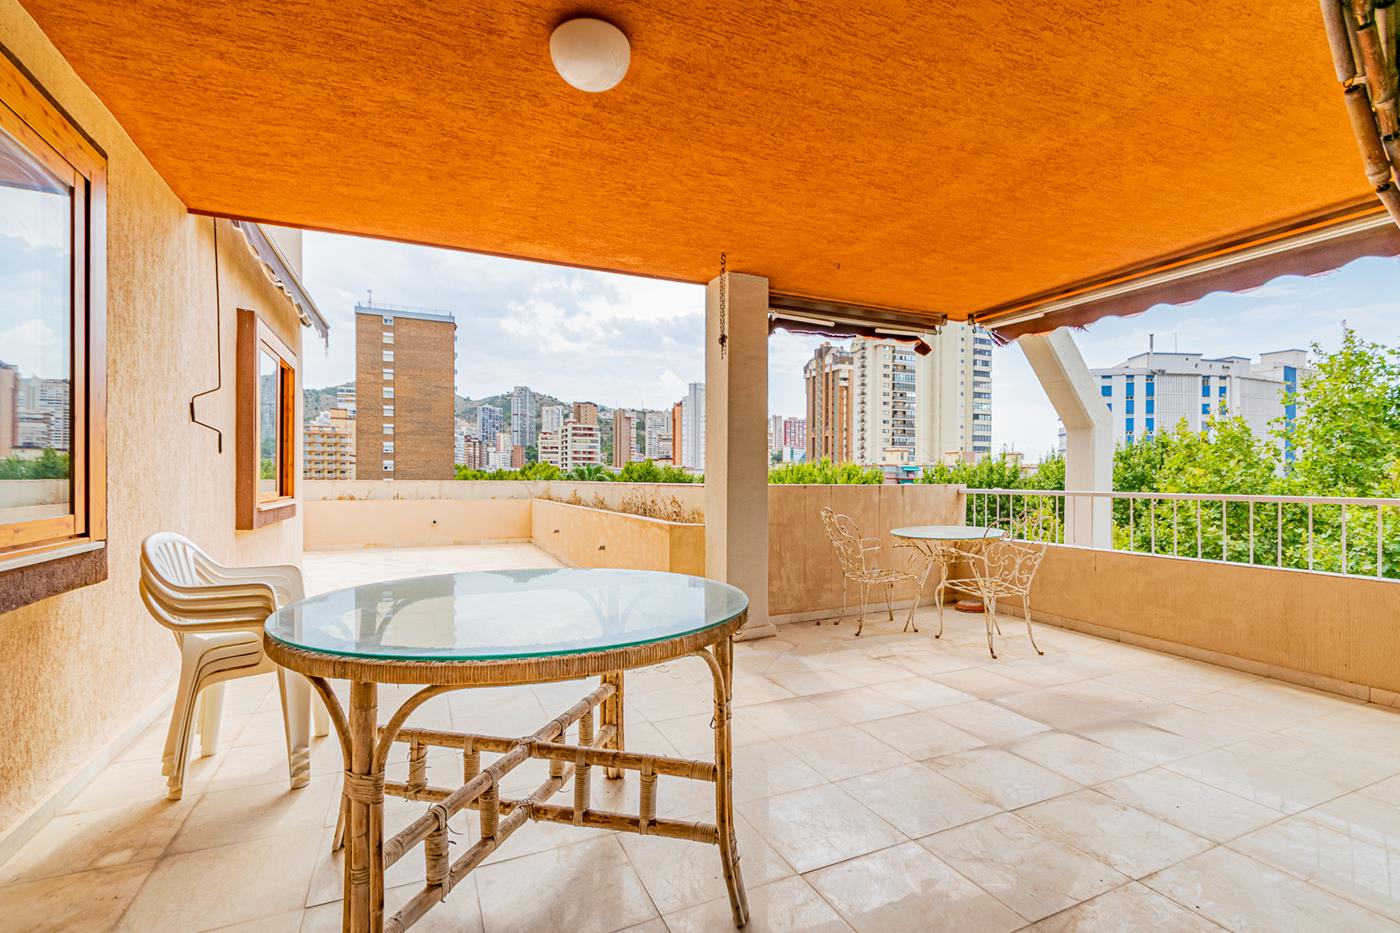 PENTHOUSE FOR SALE IN BENIDORM WITH LARGE TERRACE AND PANORAMIC VIEWS